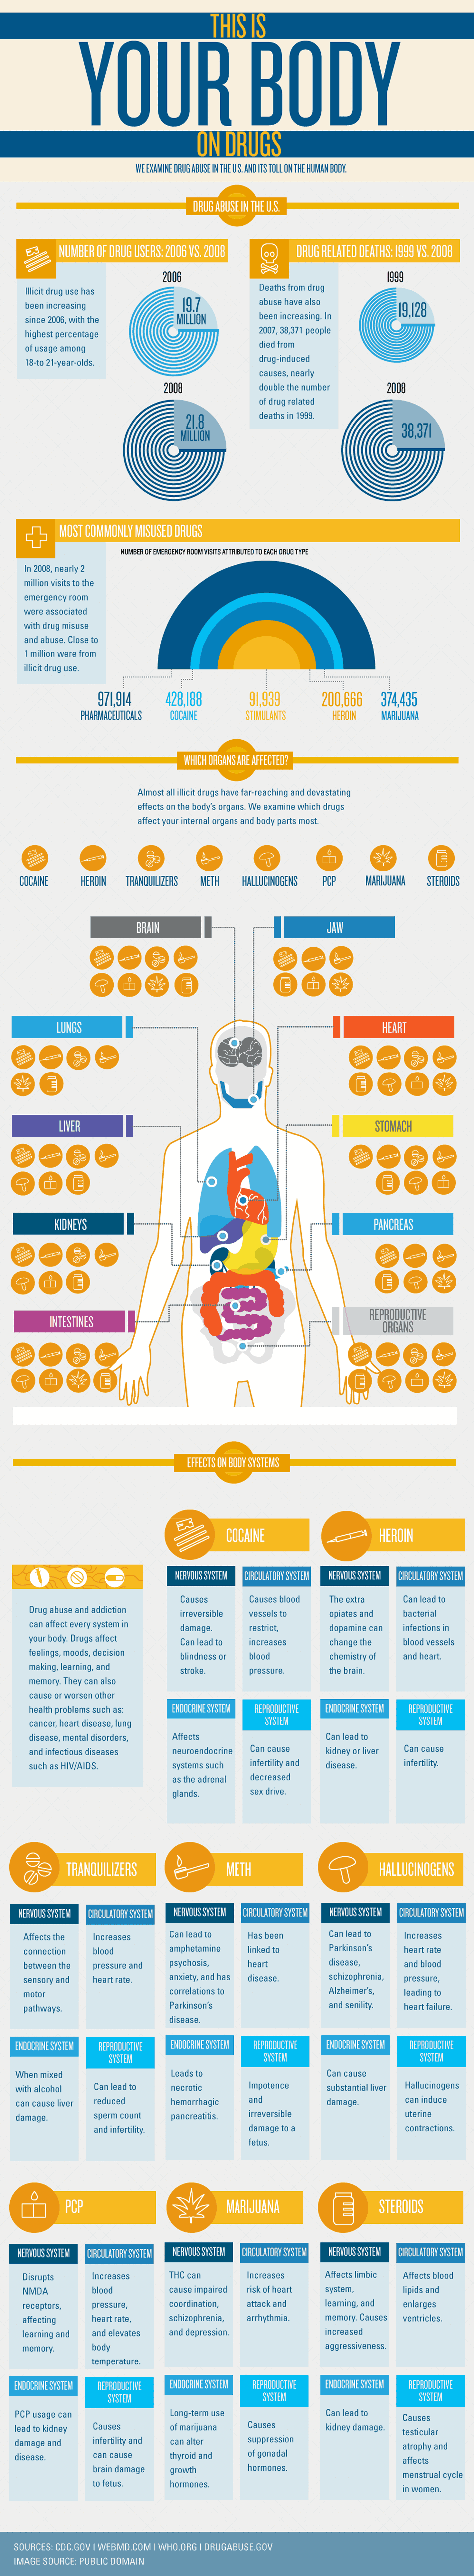 Drug Abuse and Your Body: Exposed Infographic